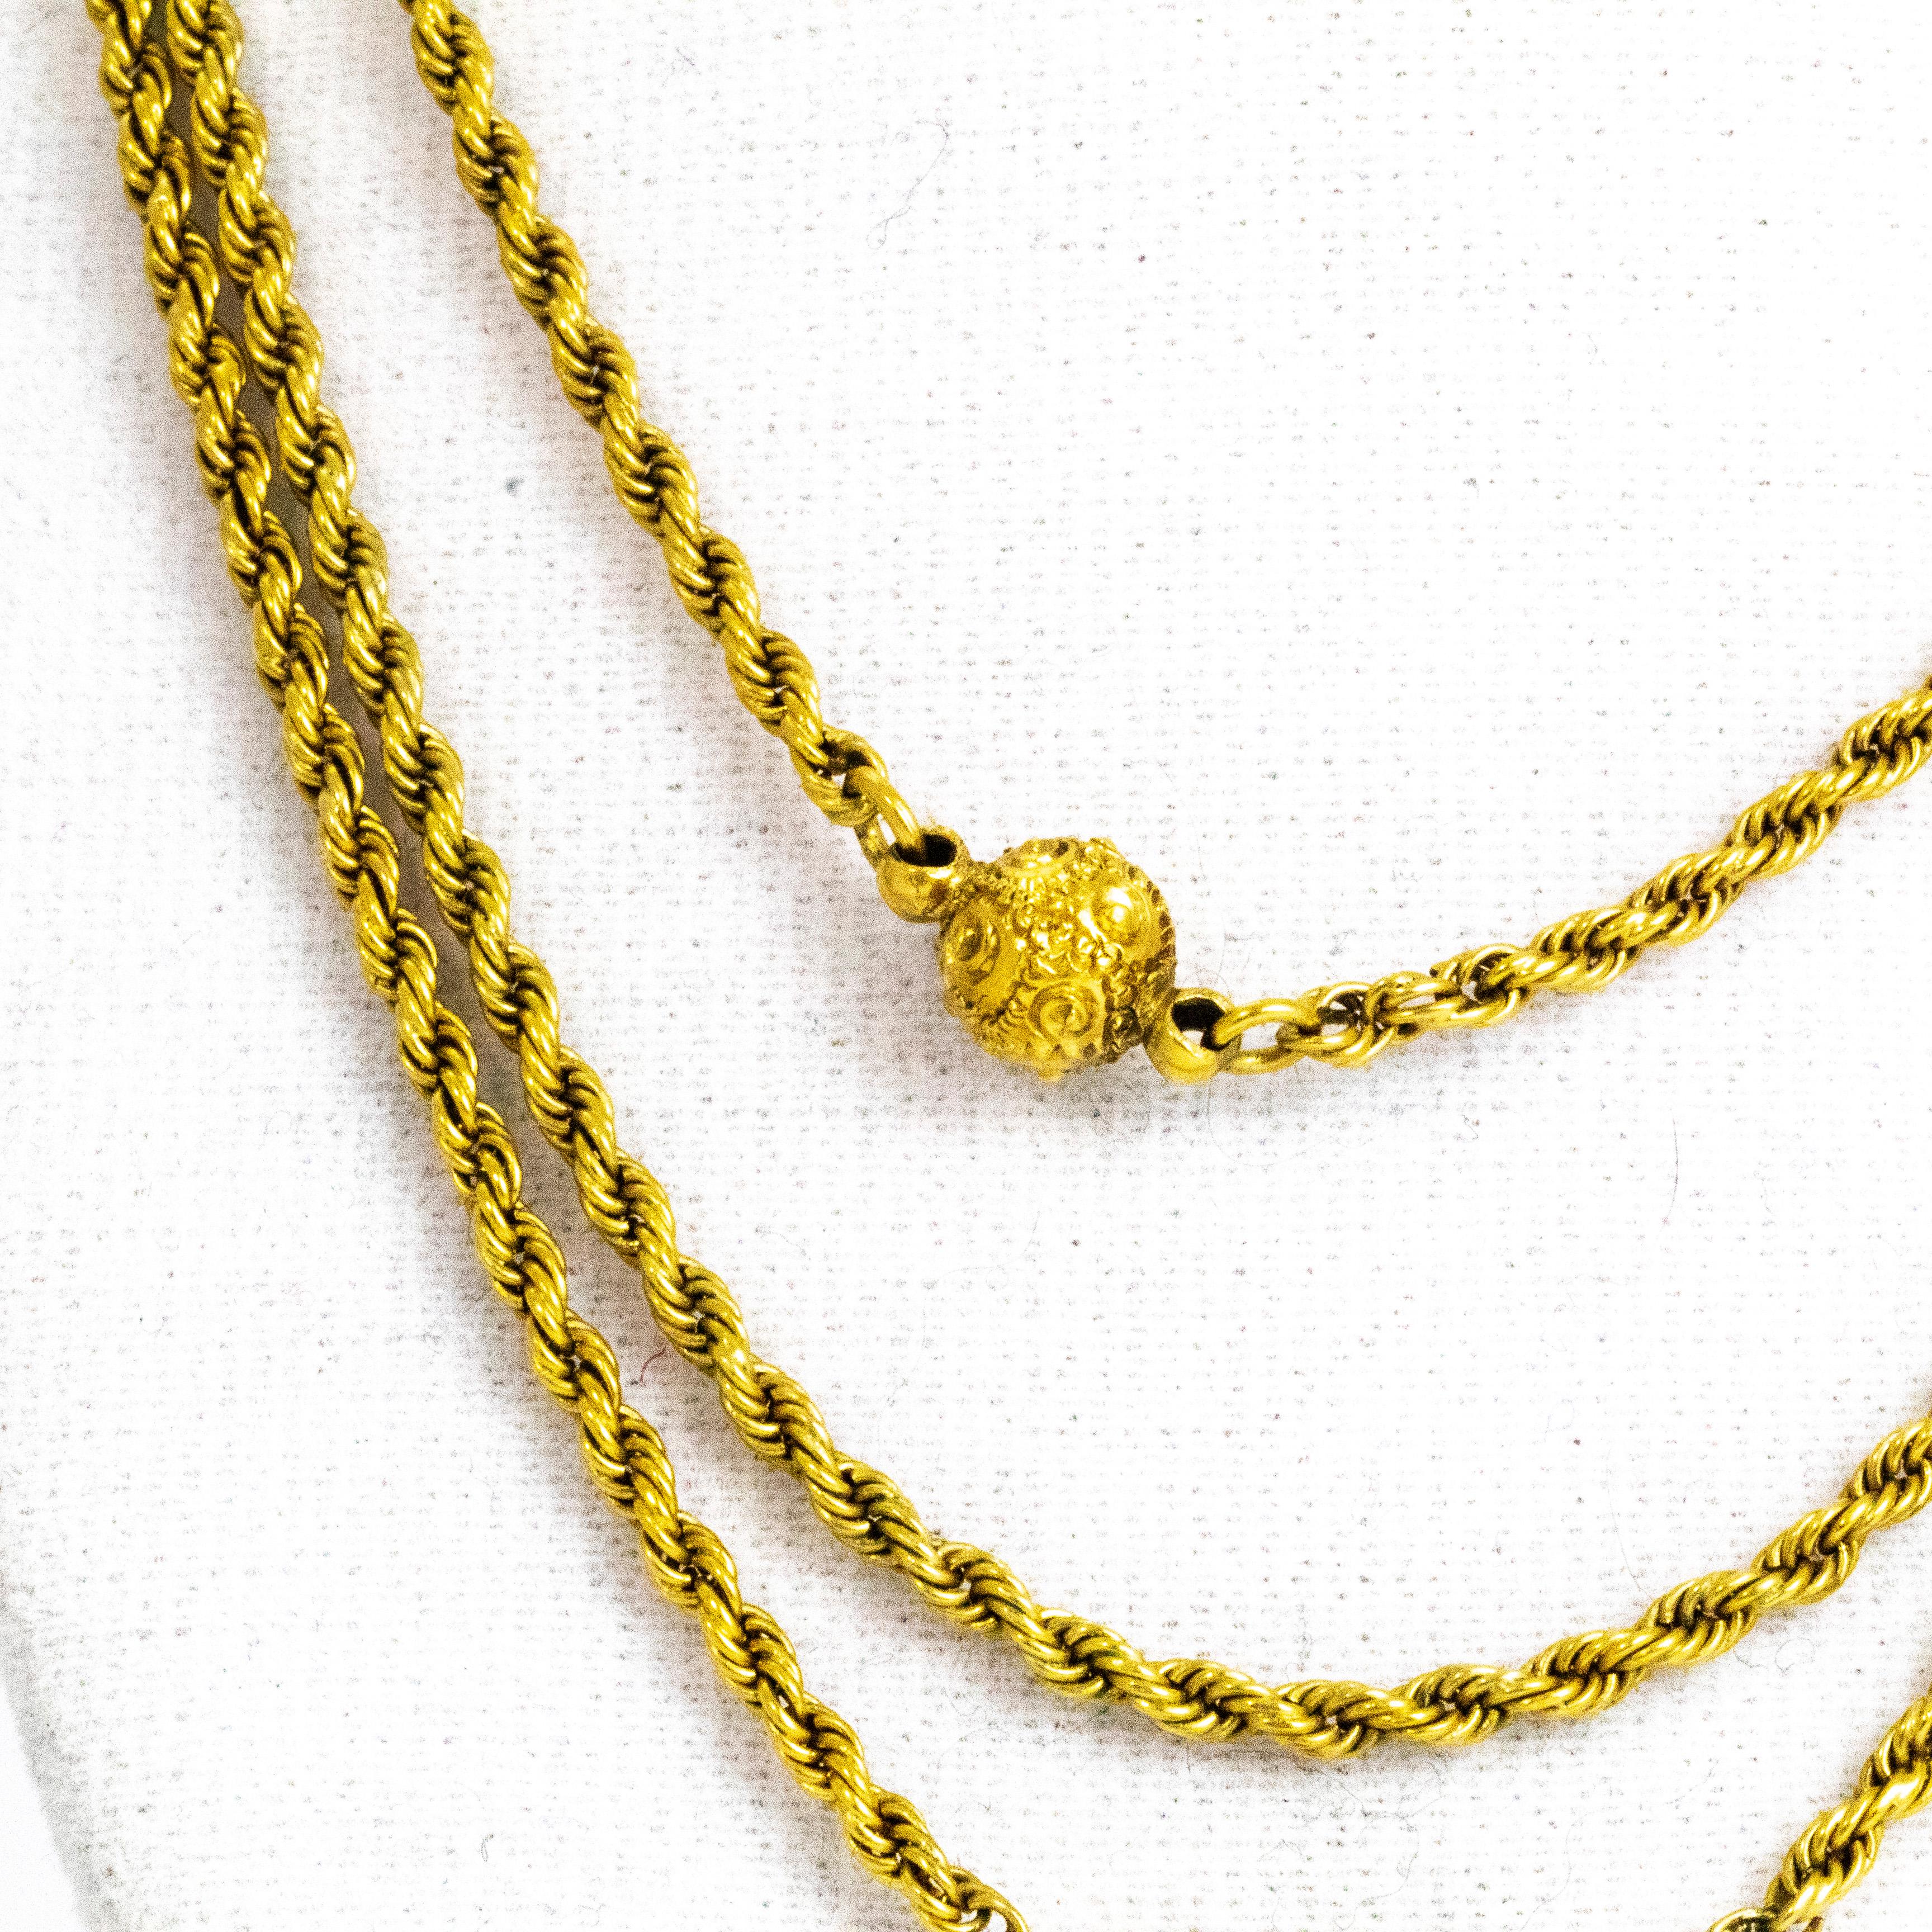 The orbs on this rope twist chain are absolutely stunning. Each one has so much intricate swirling engraving on it. The necklace has one barrel clasp at the back but holds three separate chain to give the rifle tier look. The chain itself goes